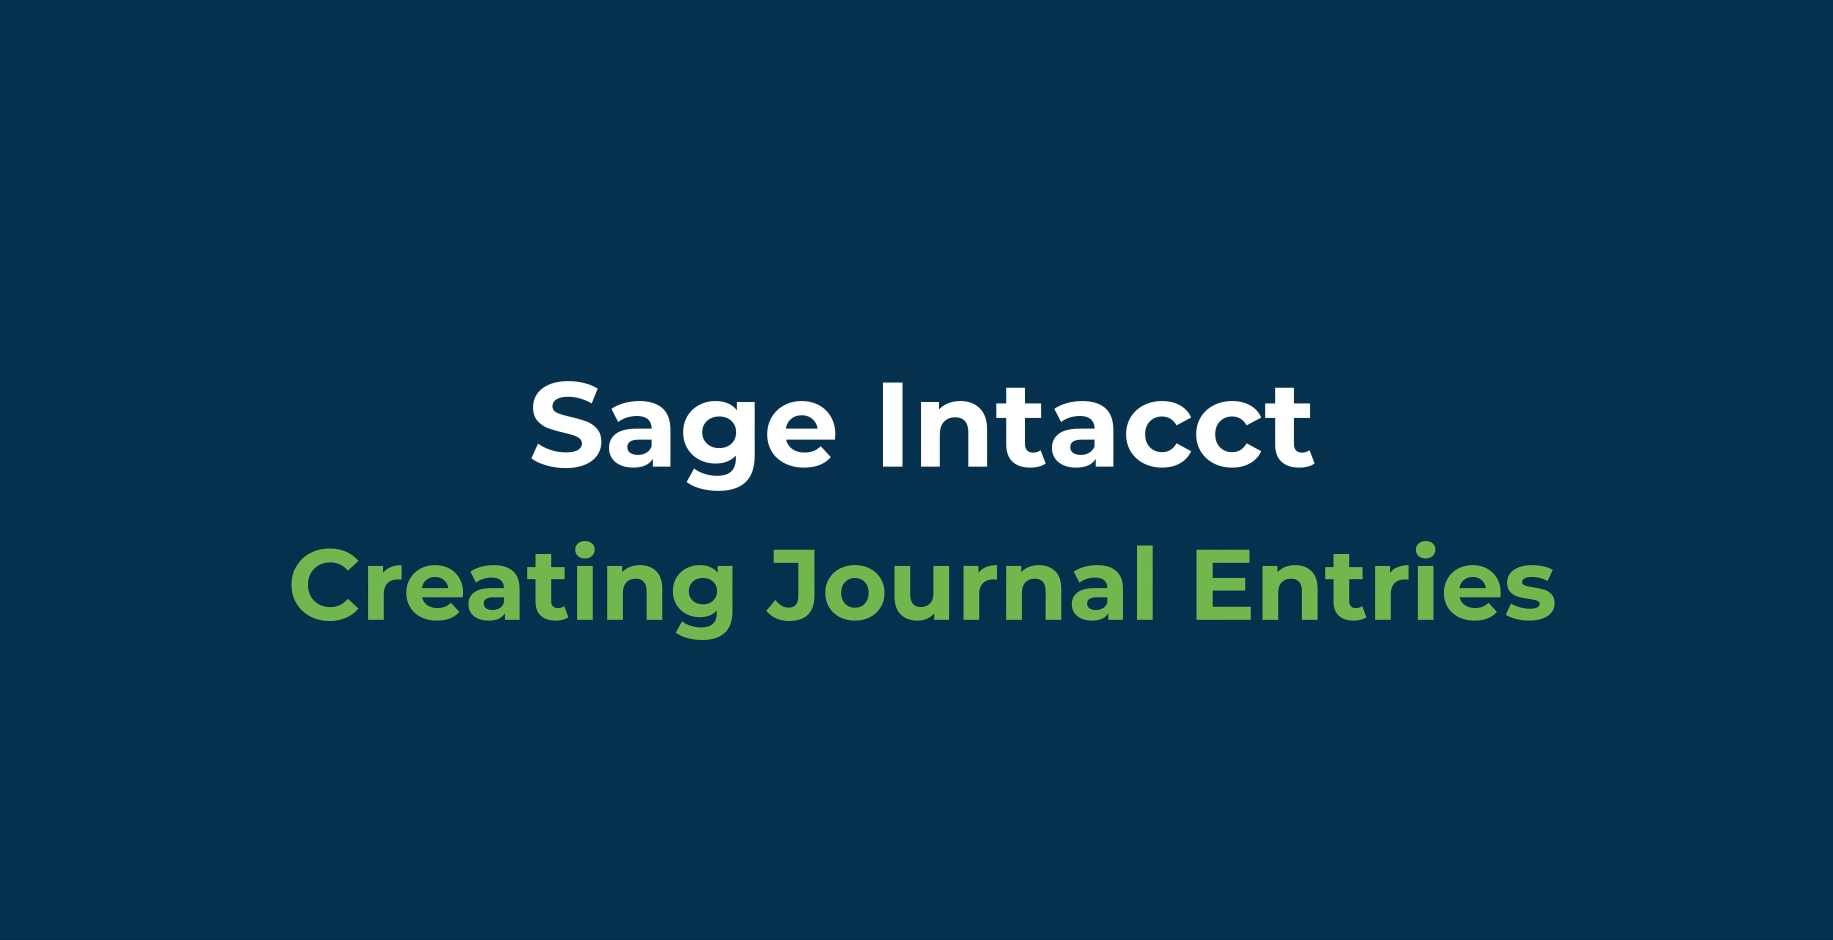 creating journal entries in sage intacct